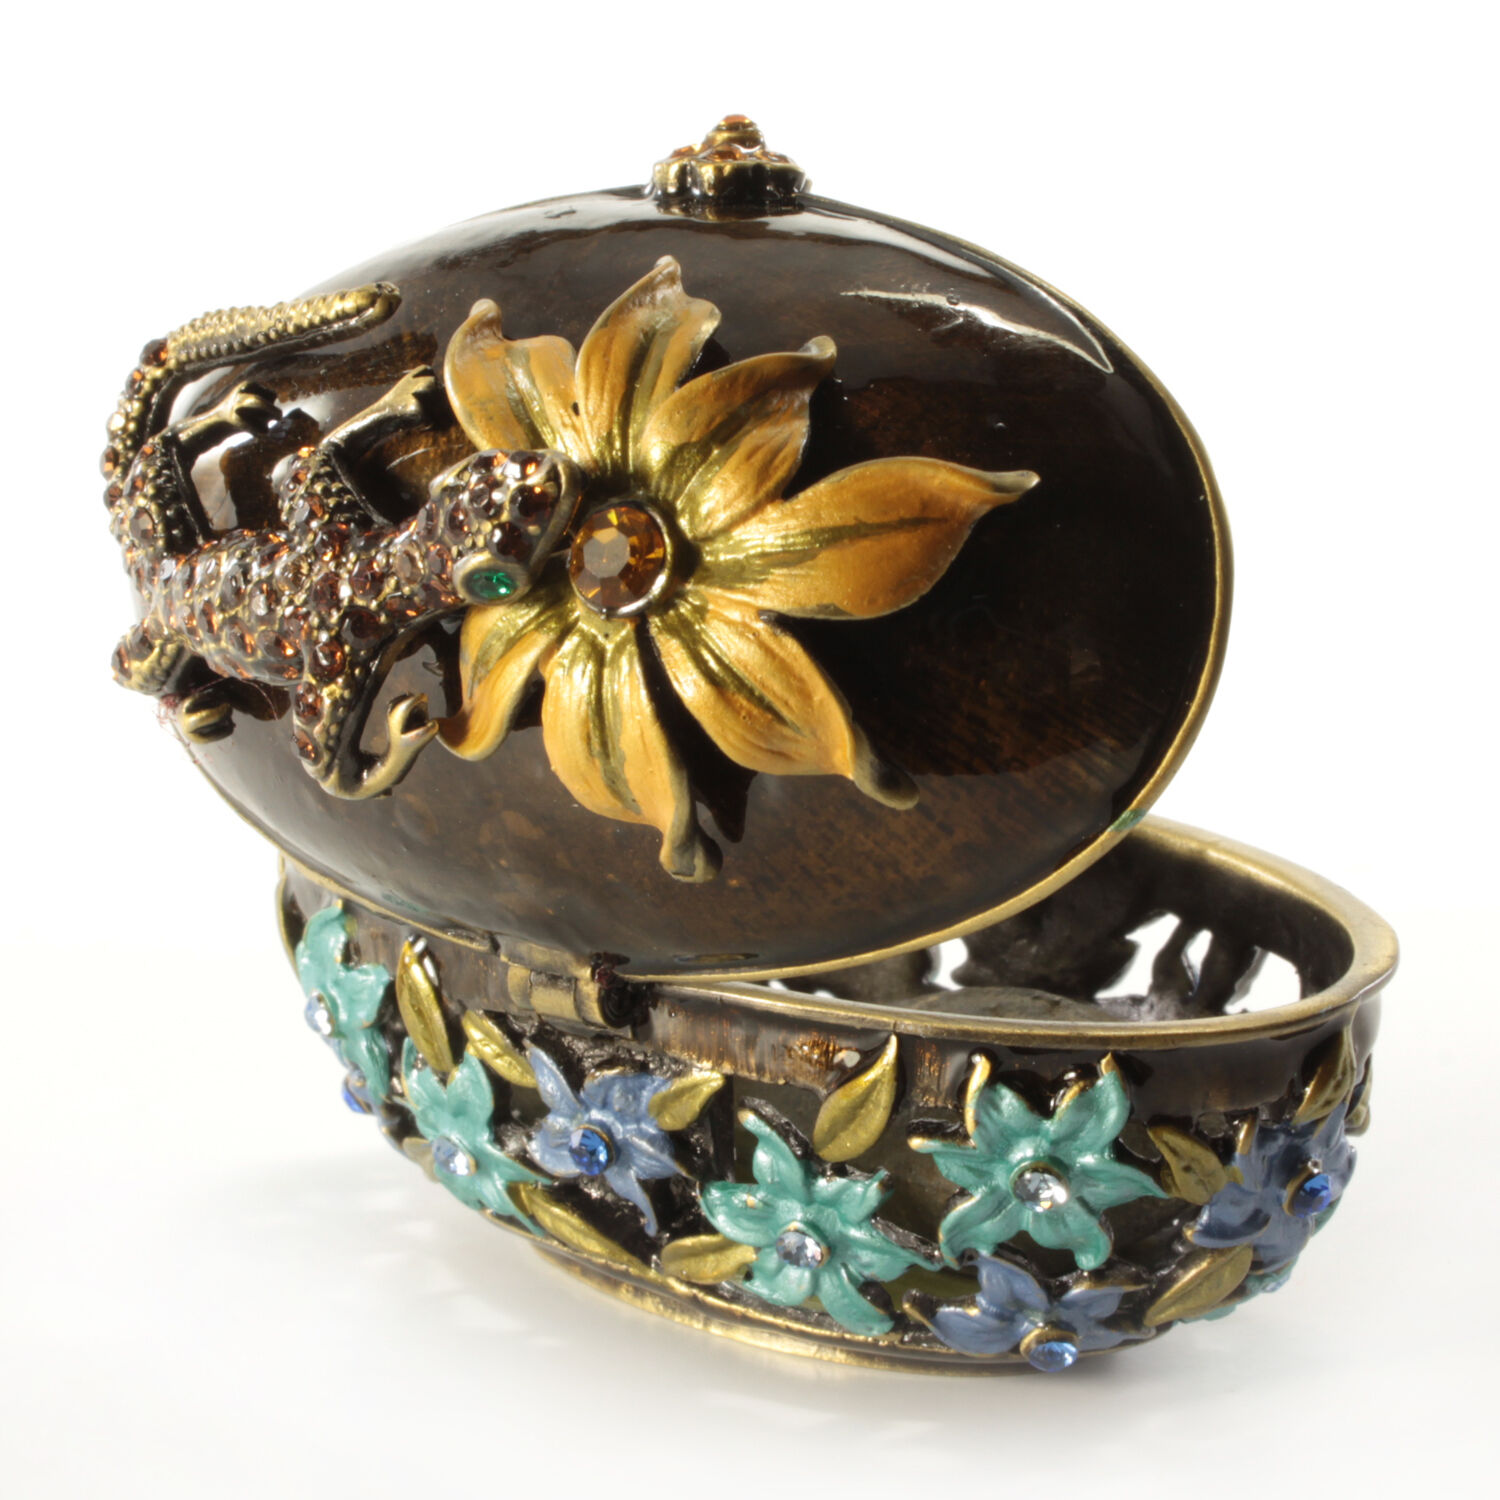 Jeweled flower motif trinket box with lizard, Faberge  figurine with crystals